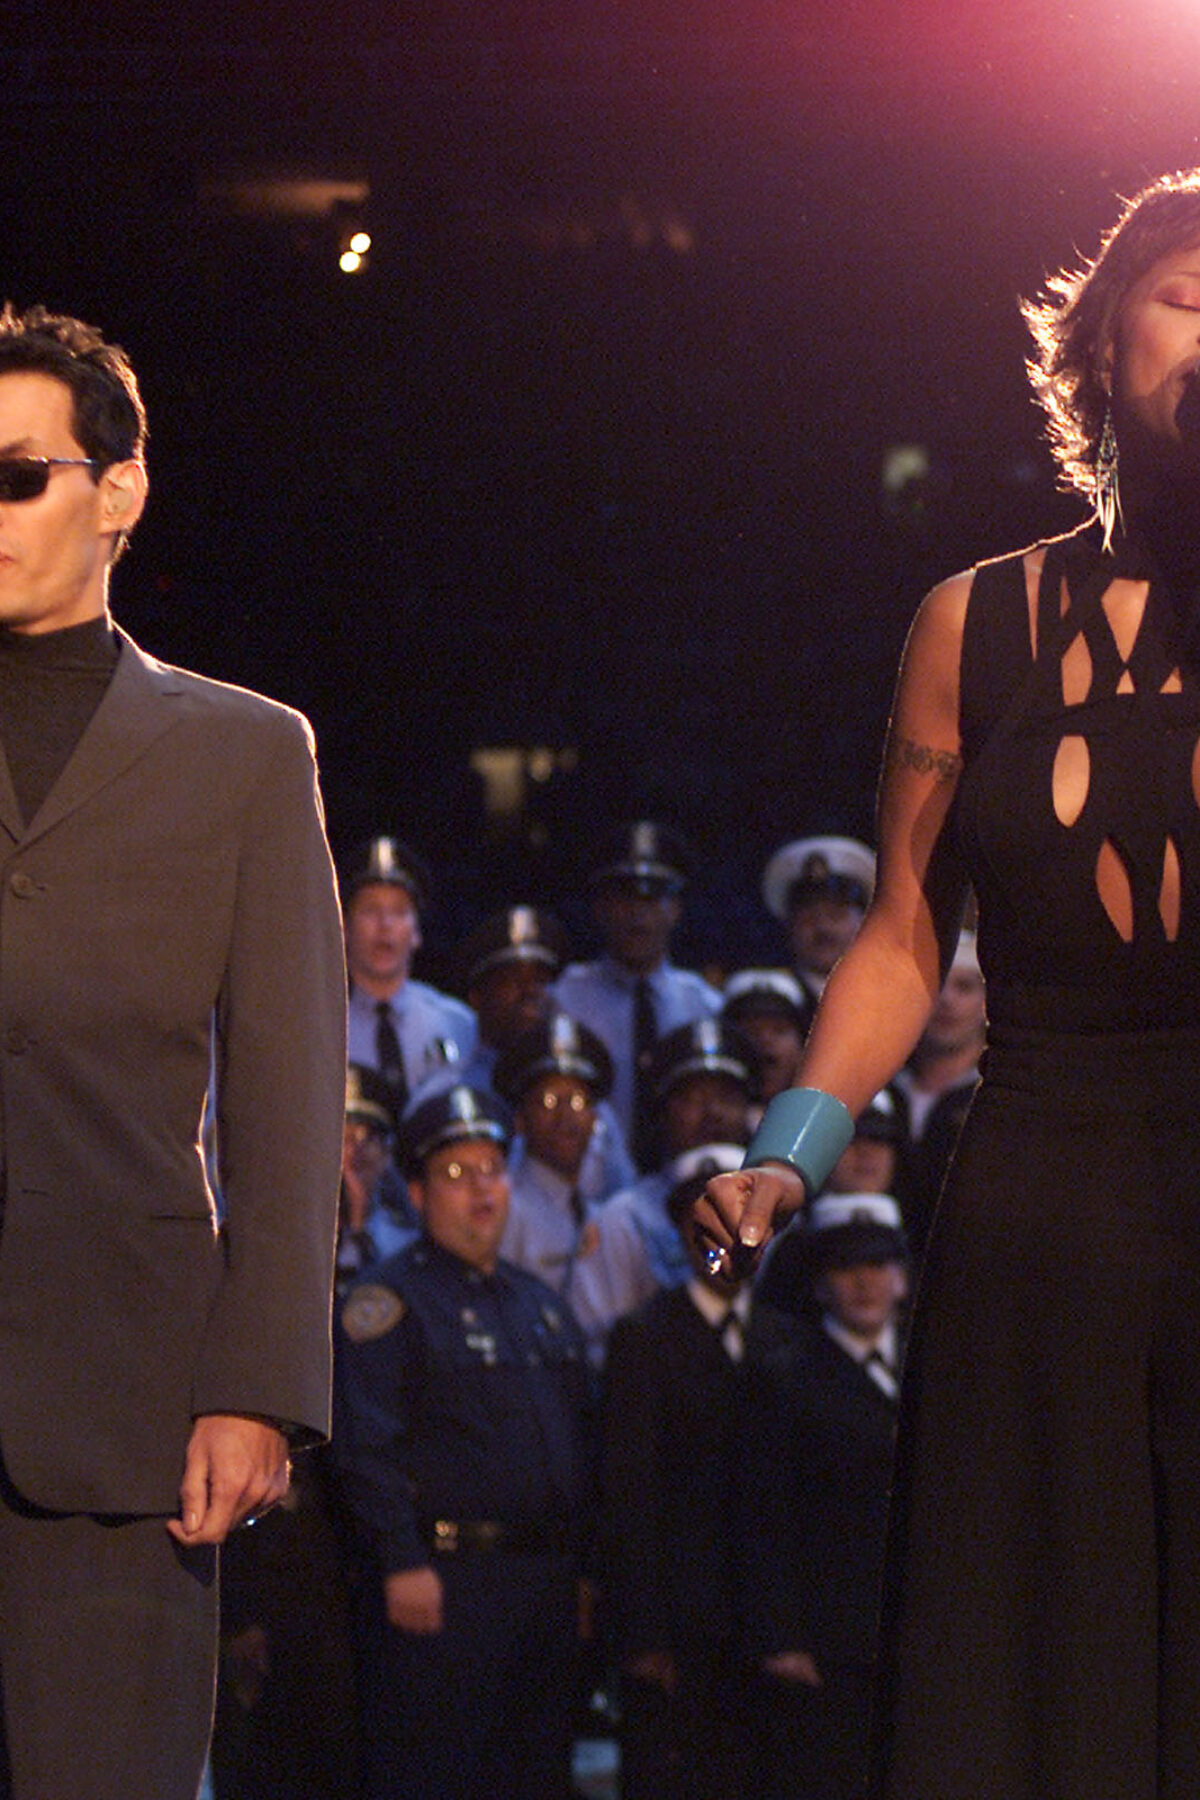 Marc Anthony & Mary J. Blige performing at the Super Bowl Pre Game Show in 2002.